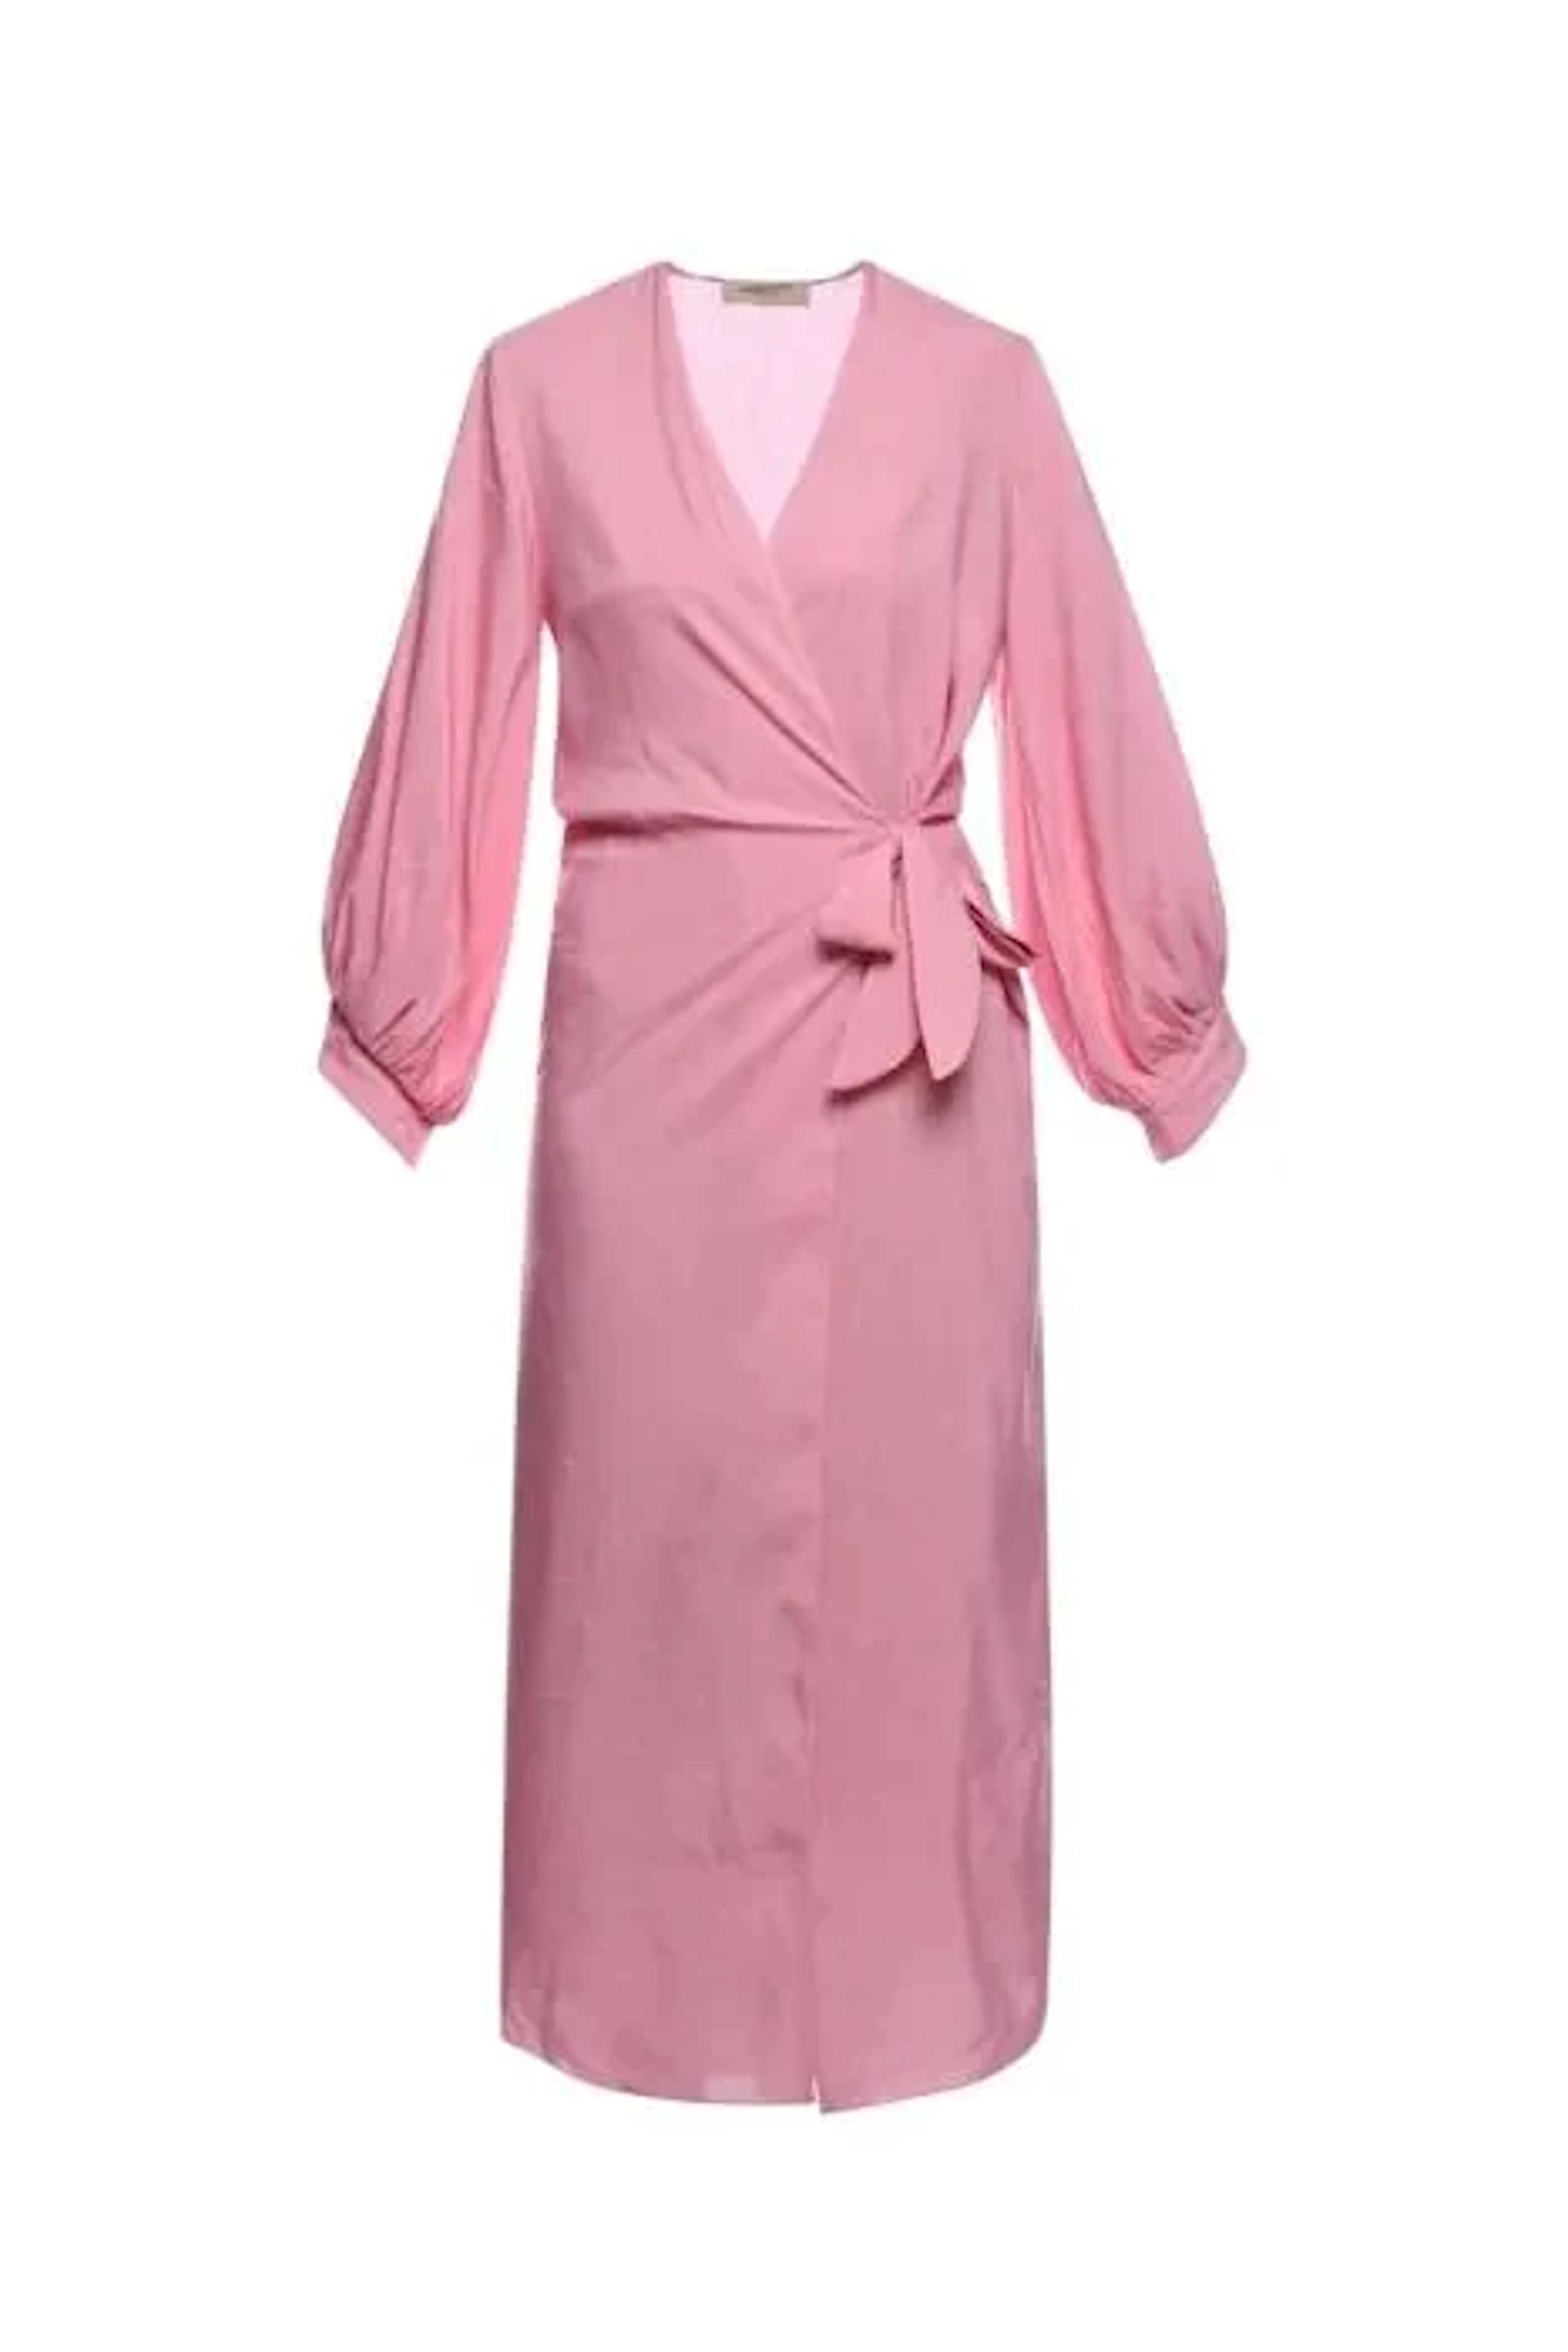 Solid Carre Vintage Pink Long Robe Product